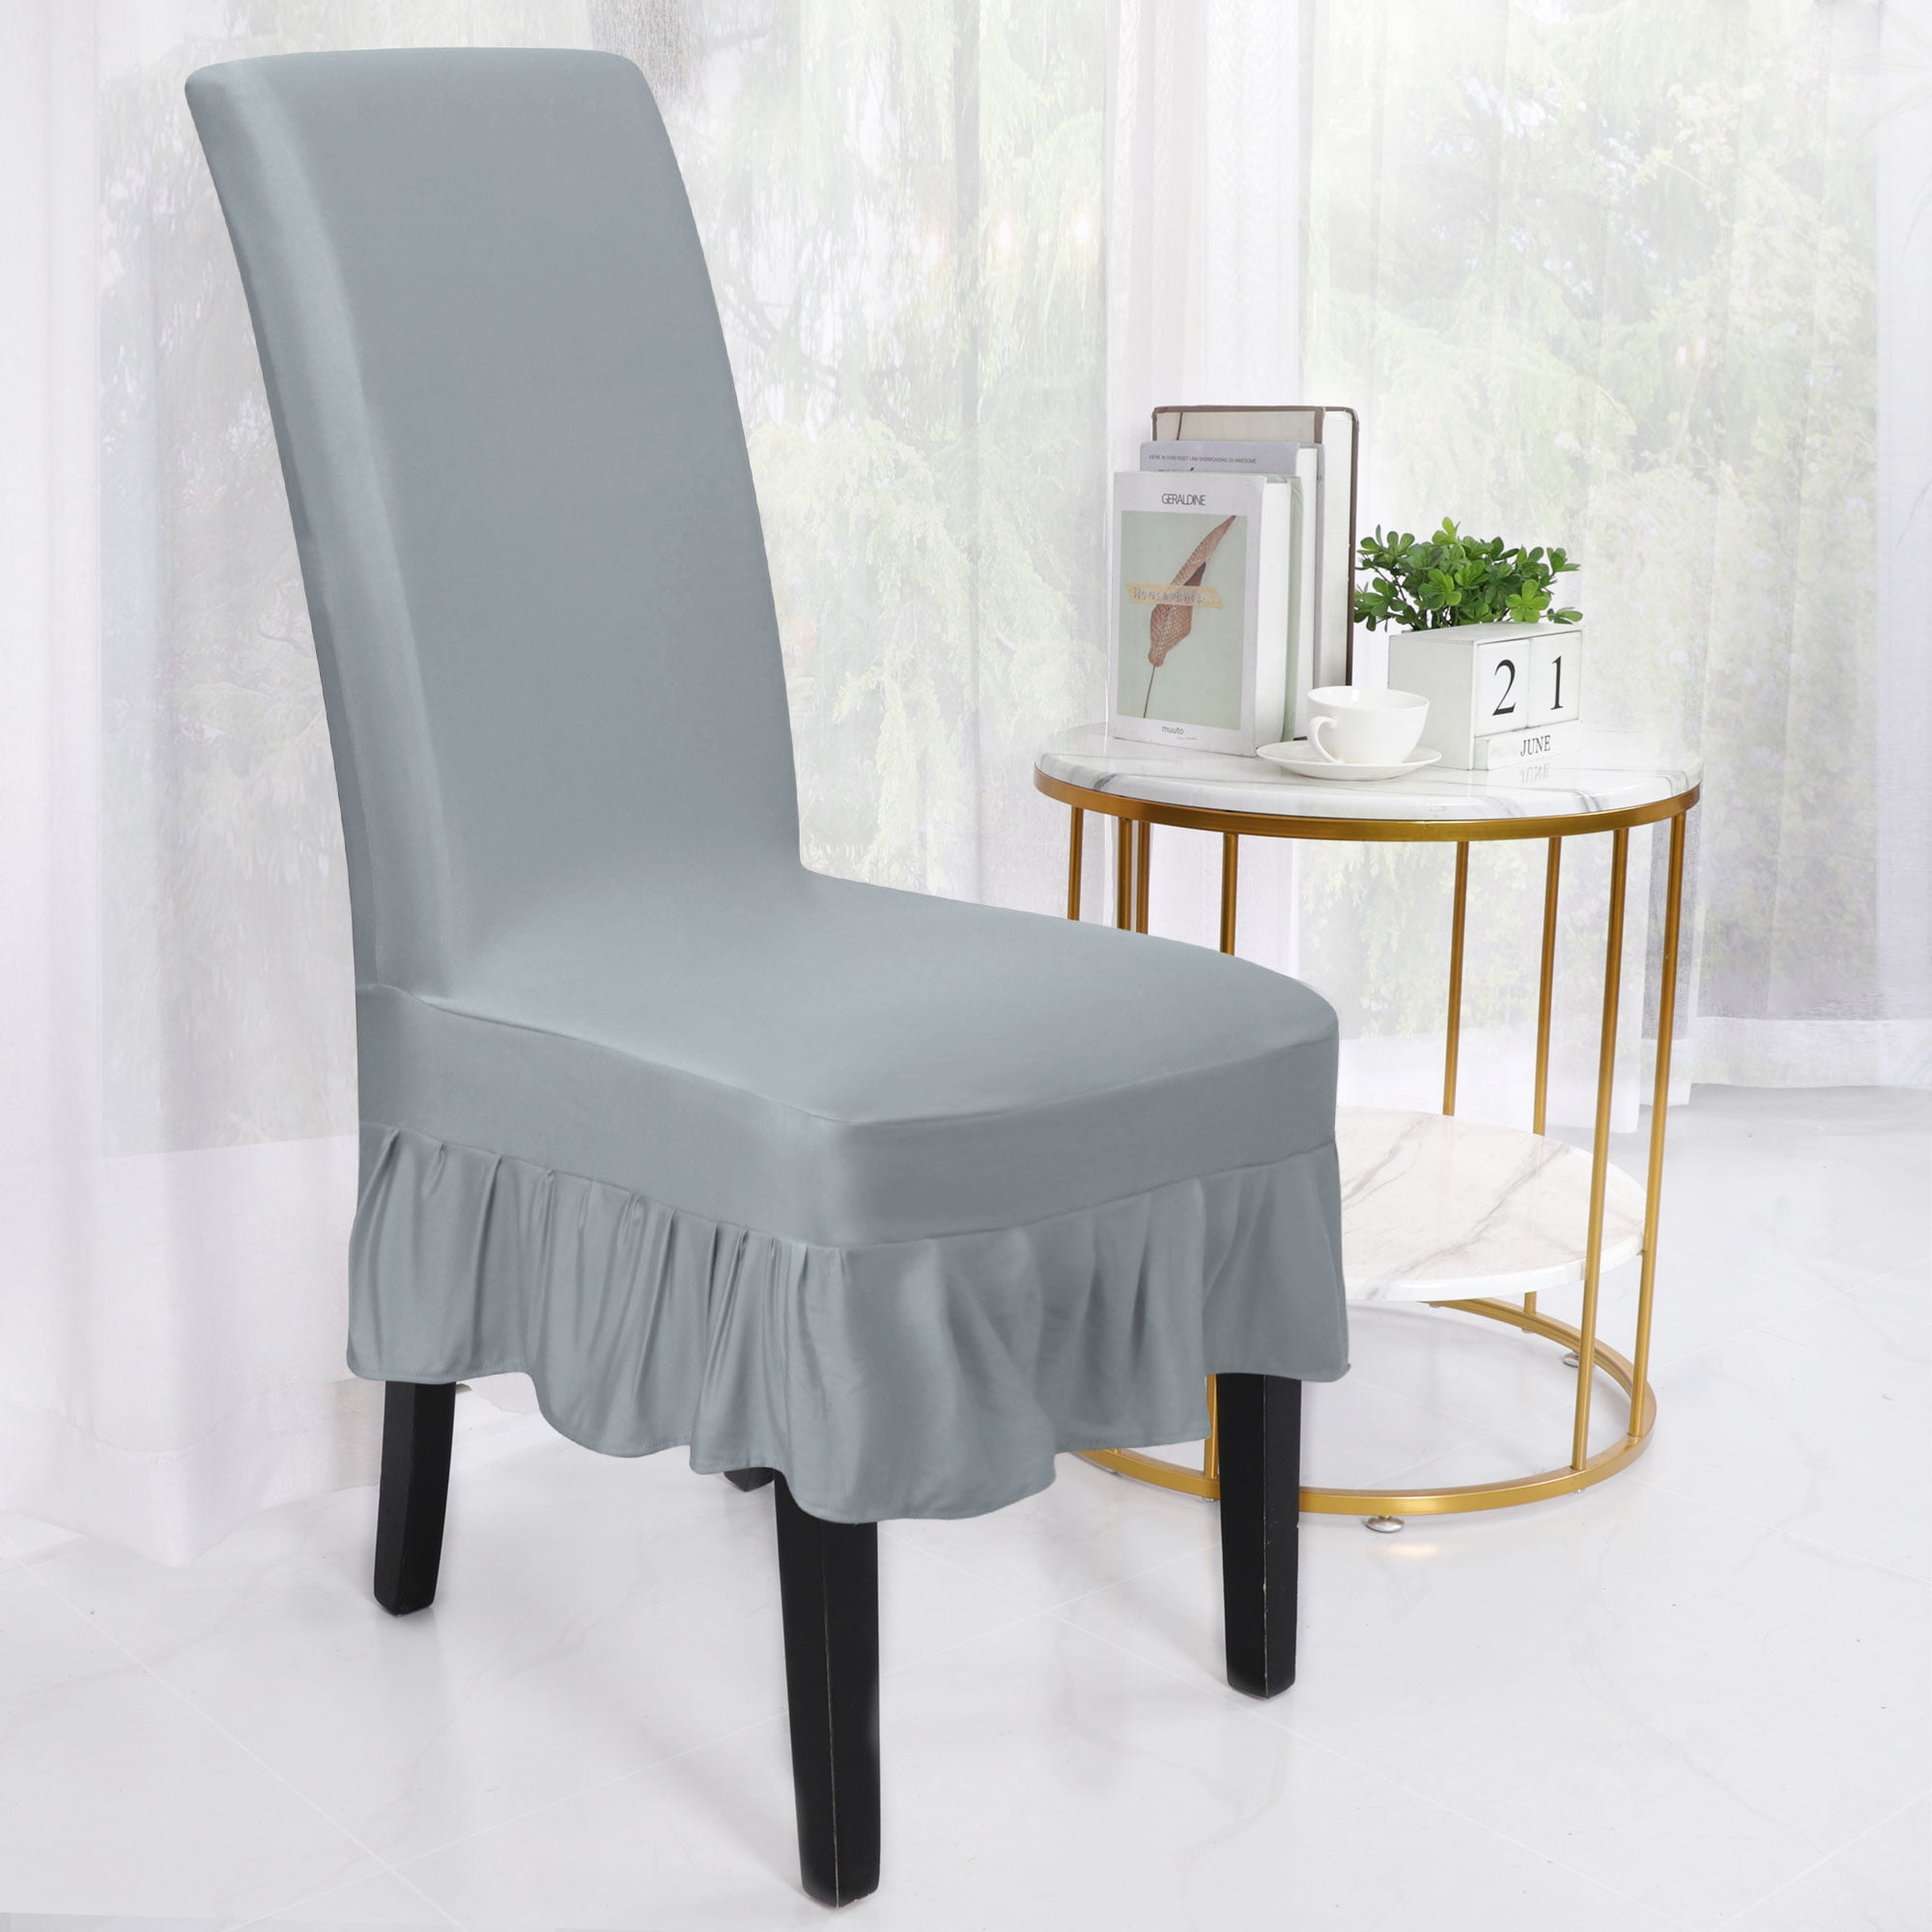 Details about   Slipcover Dining Chair Crushed Velvet Slip Covers Seat Elastic Stretch Removable 